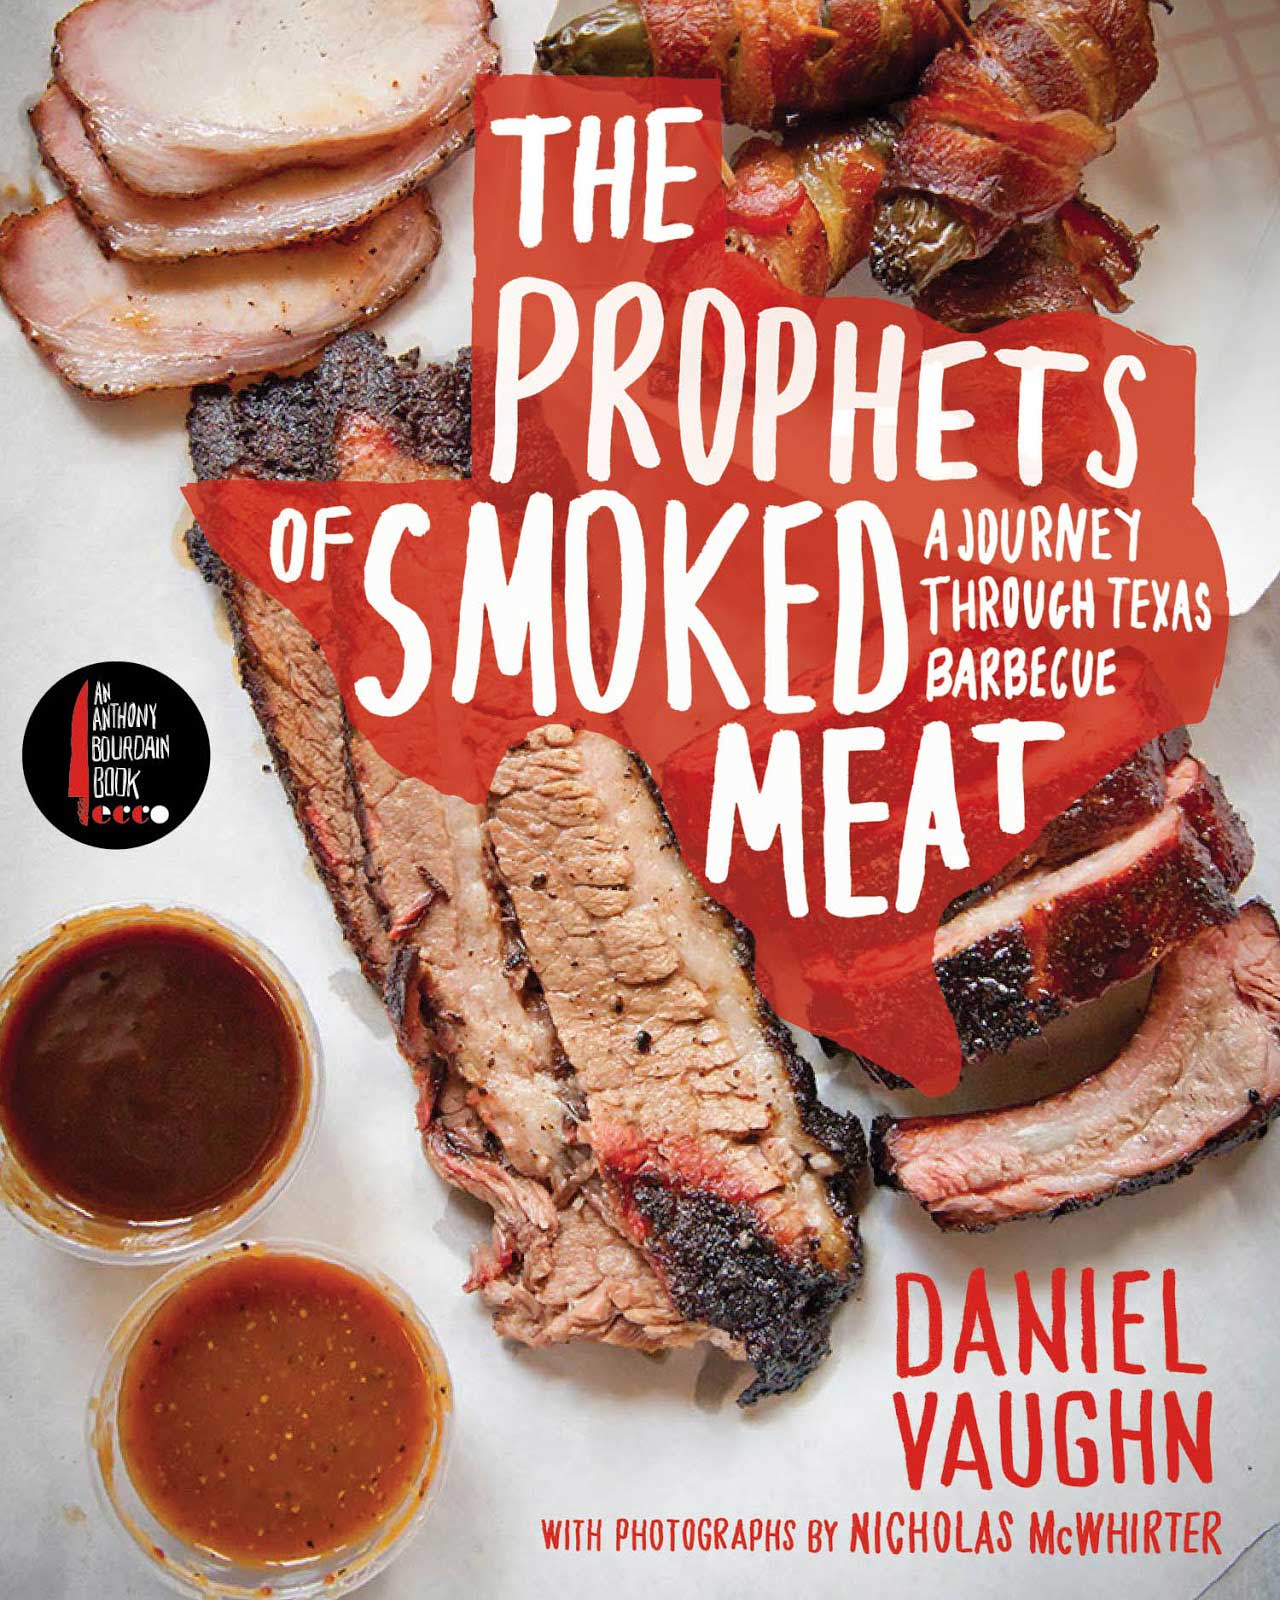 Prophets of Smoked Meat book cover